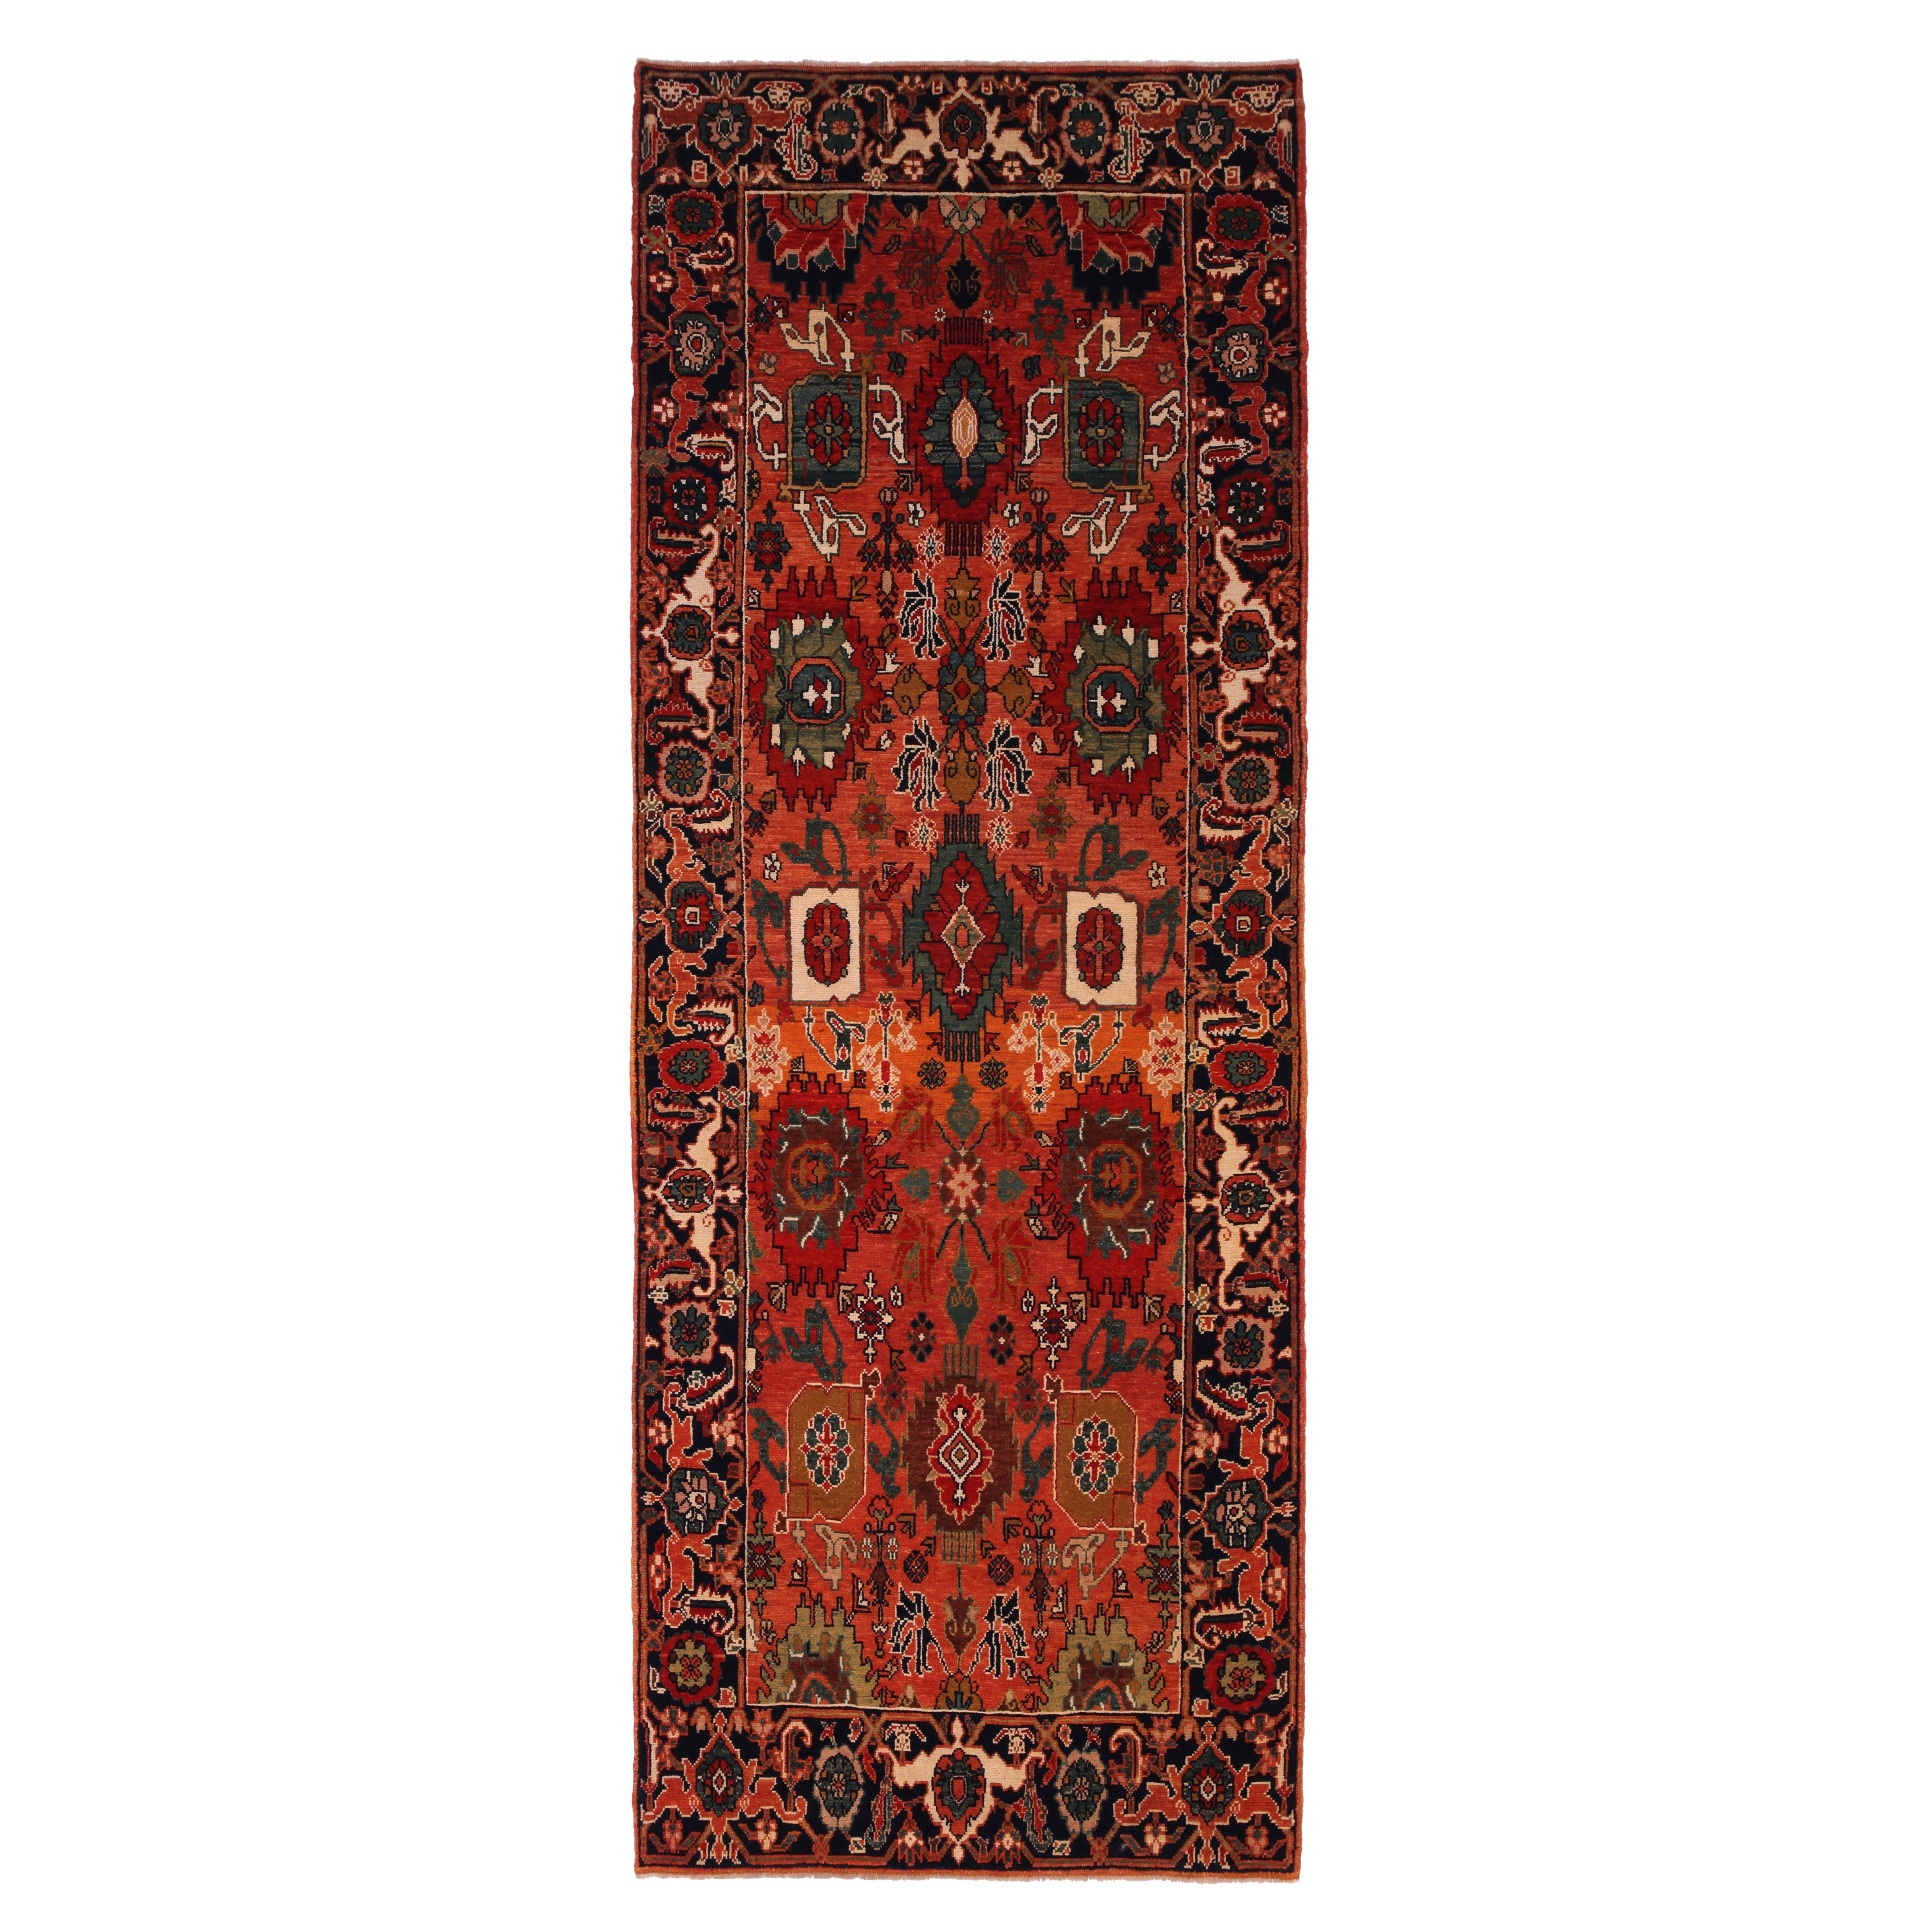 Ararat Rugs Palmettes and Flowers Lattice Rug Revival Carpet, Natural Dyed For Sale